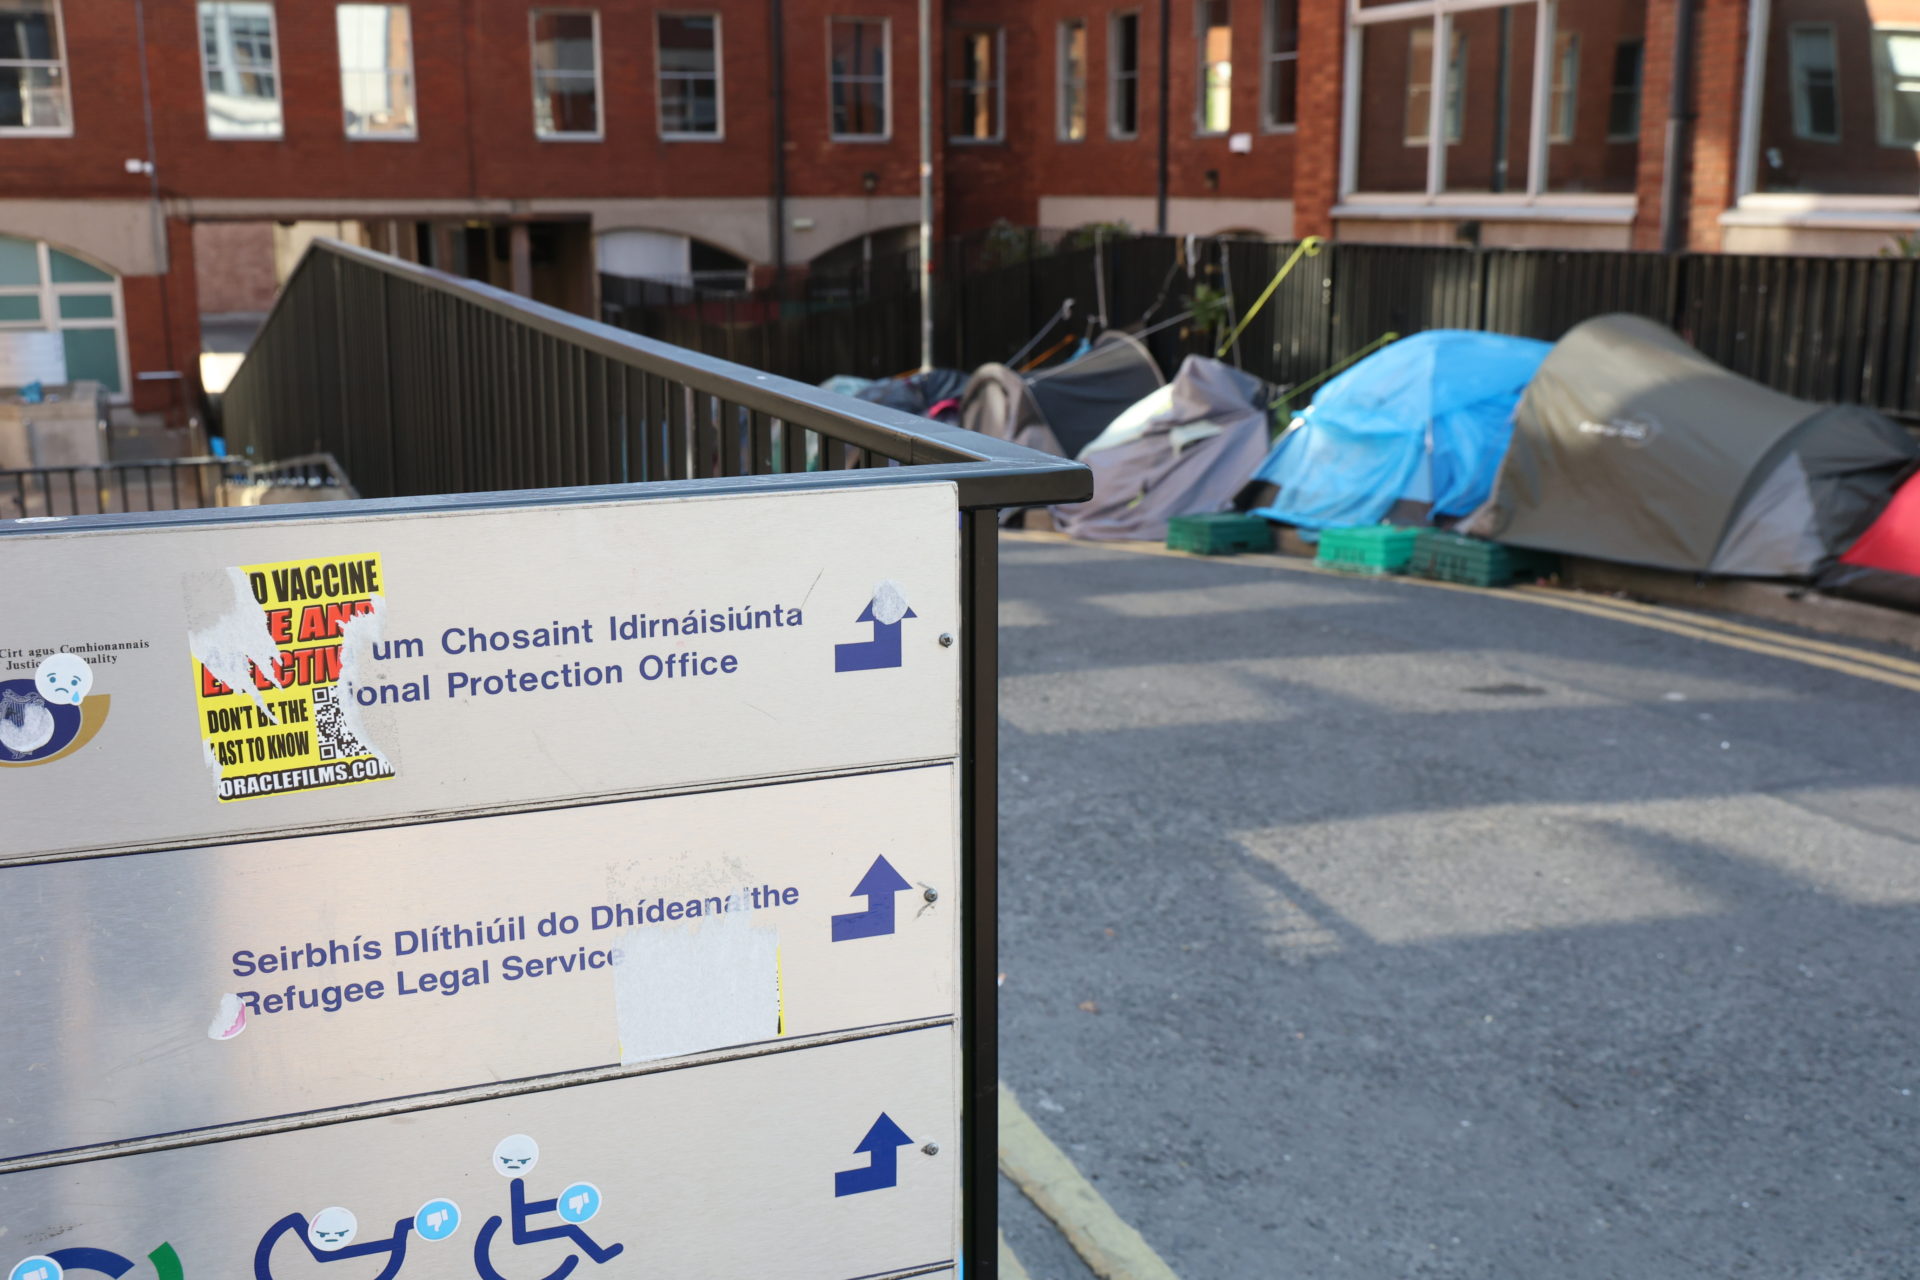 Tents outside the International Protection Office on Mount Street in Dublin